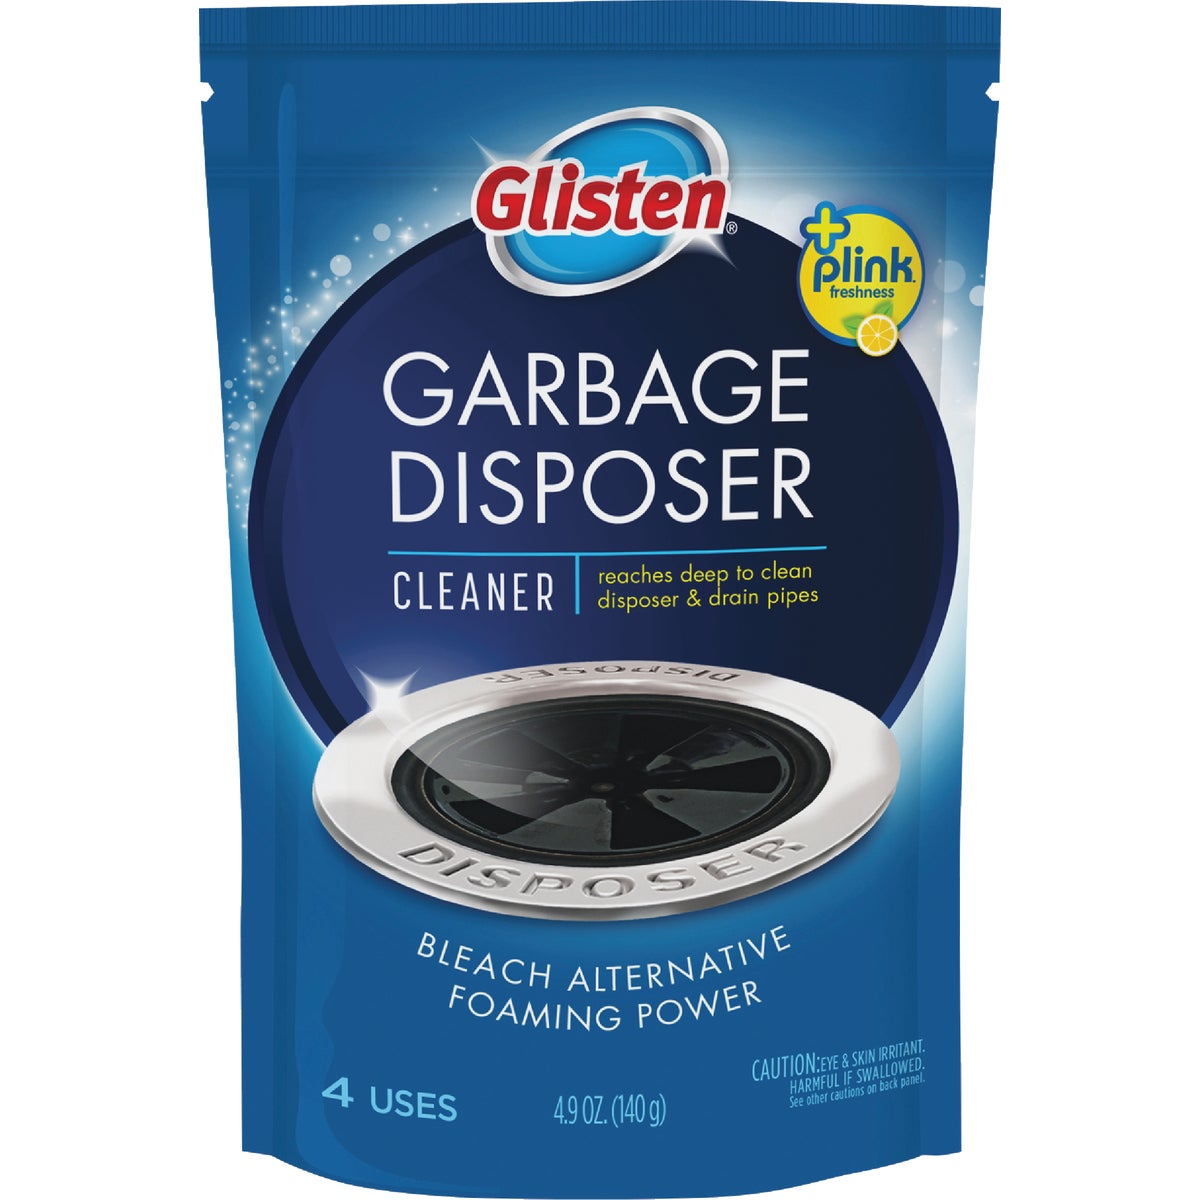 Item 410705, Fight back against sink build-up and odors with Glisten Garbage Disposer 